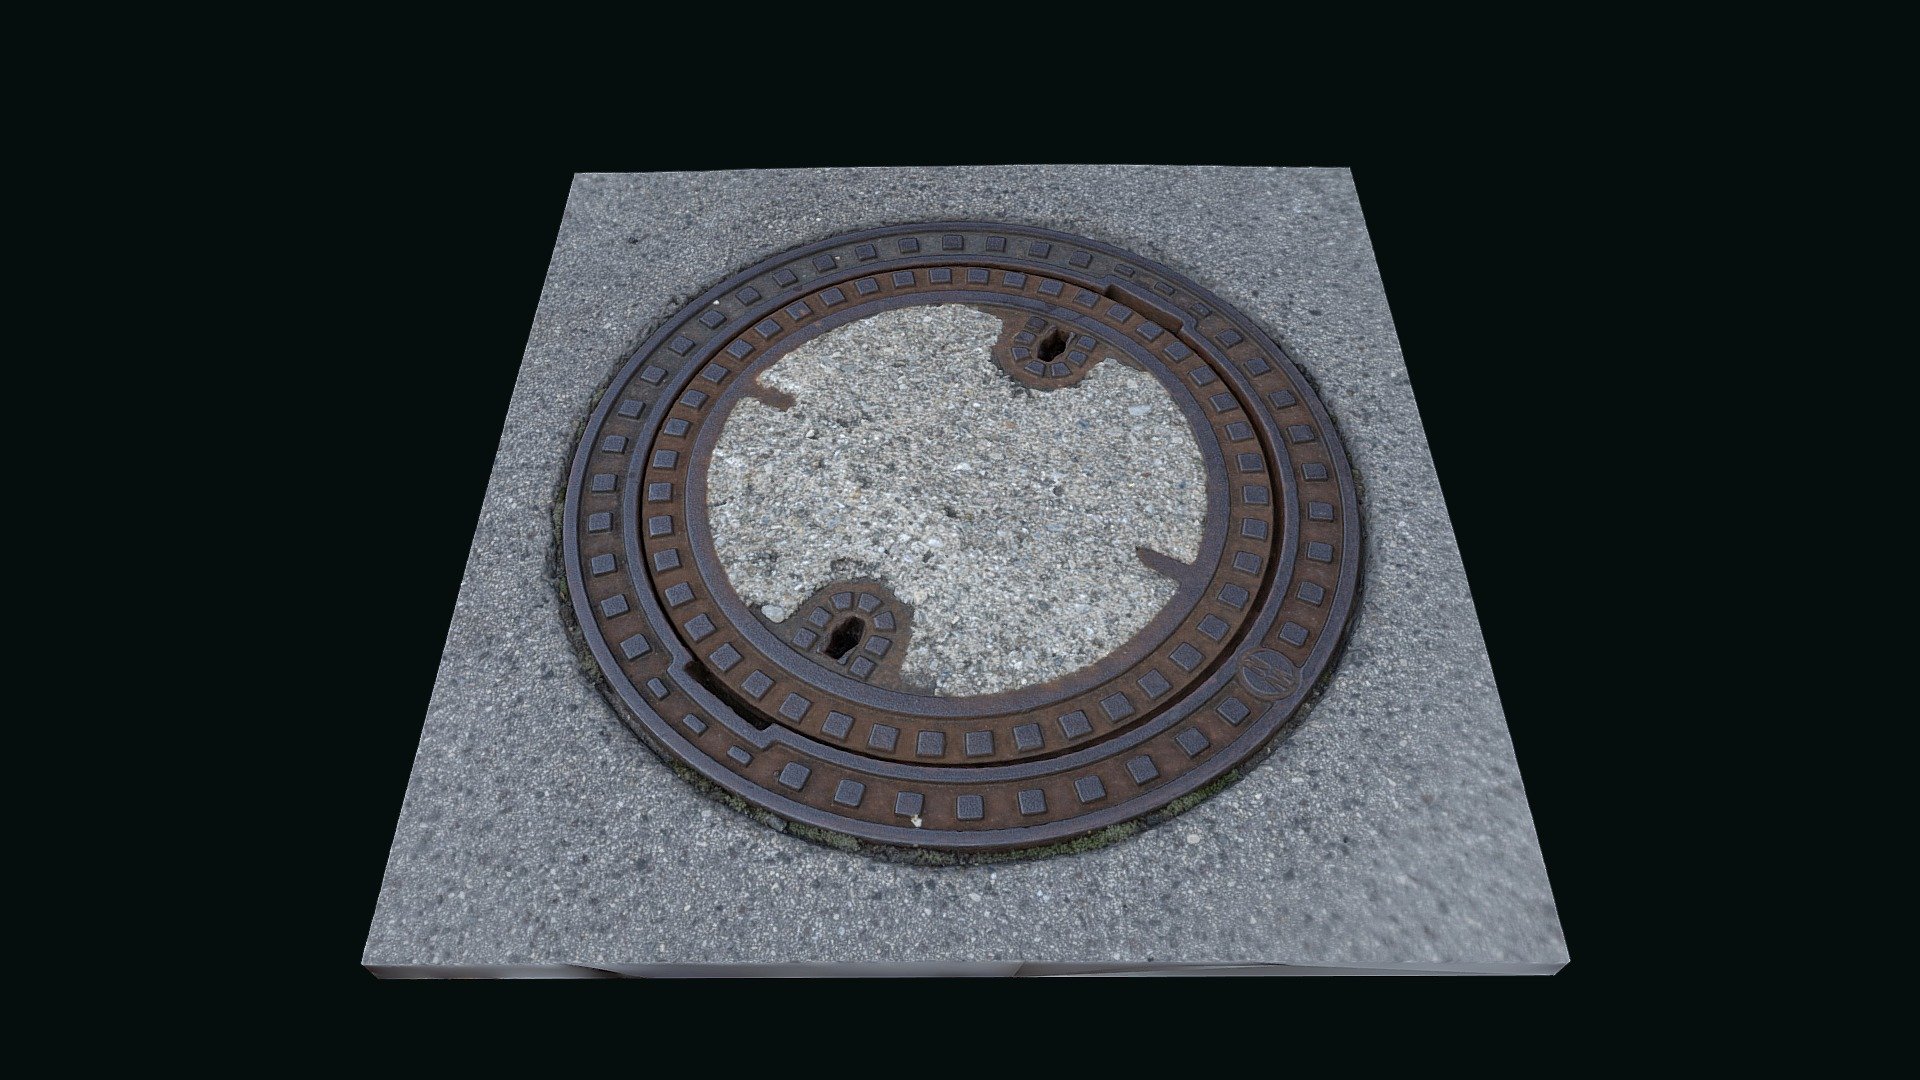 Drain cover. Just taking a walk in Vienna.

Photogrammetry reconstruction in RealityCapture from 14 images. © Saulius Zaura www.dronepartner.lt 2023 - Drain cover in Vienna - Buy Royalty Free 3D model by Saulius.Zaura 3d model